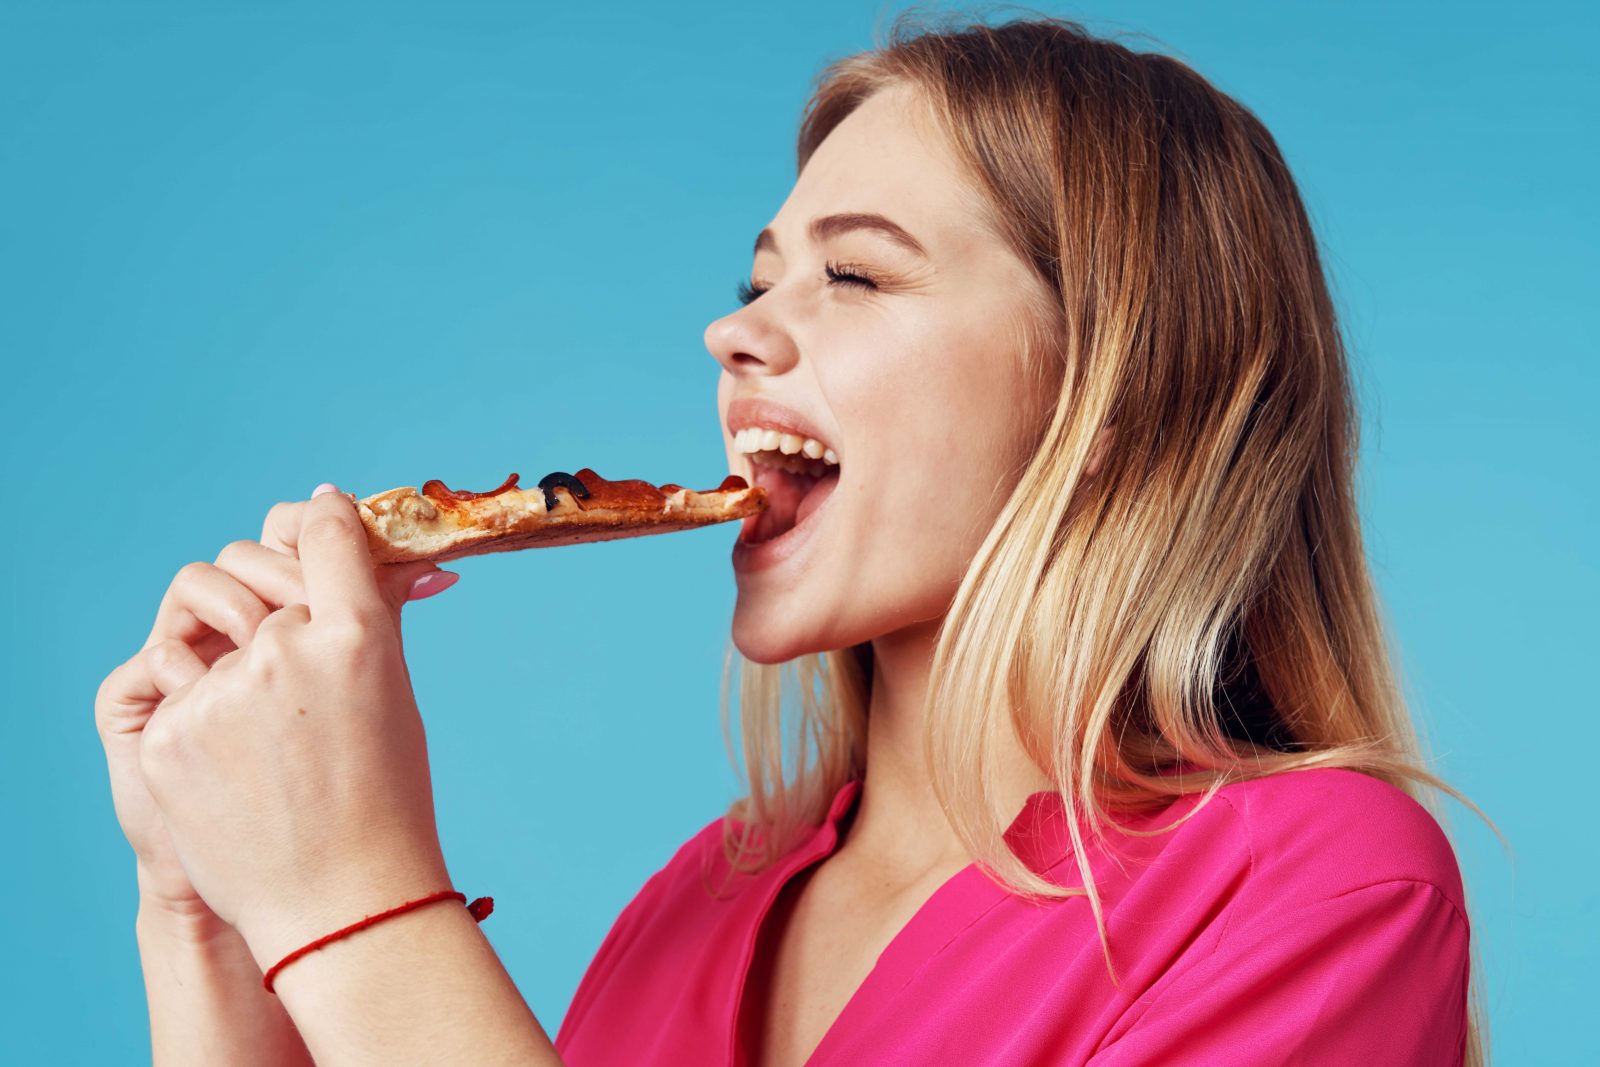 Pizza brands need insight on what their consumers value to stay ahead of competitors.